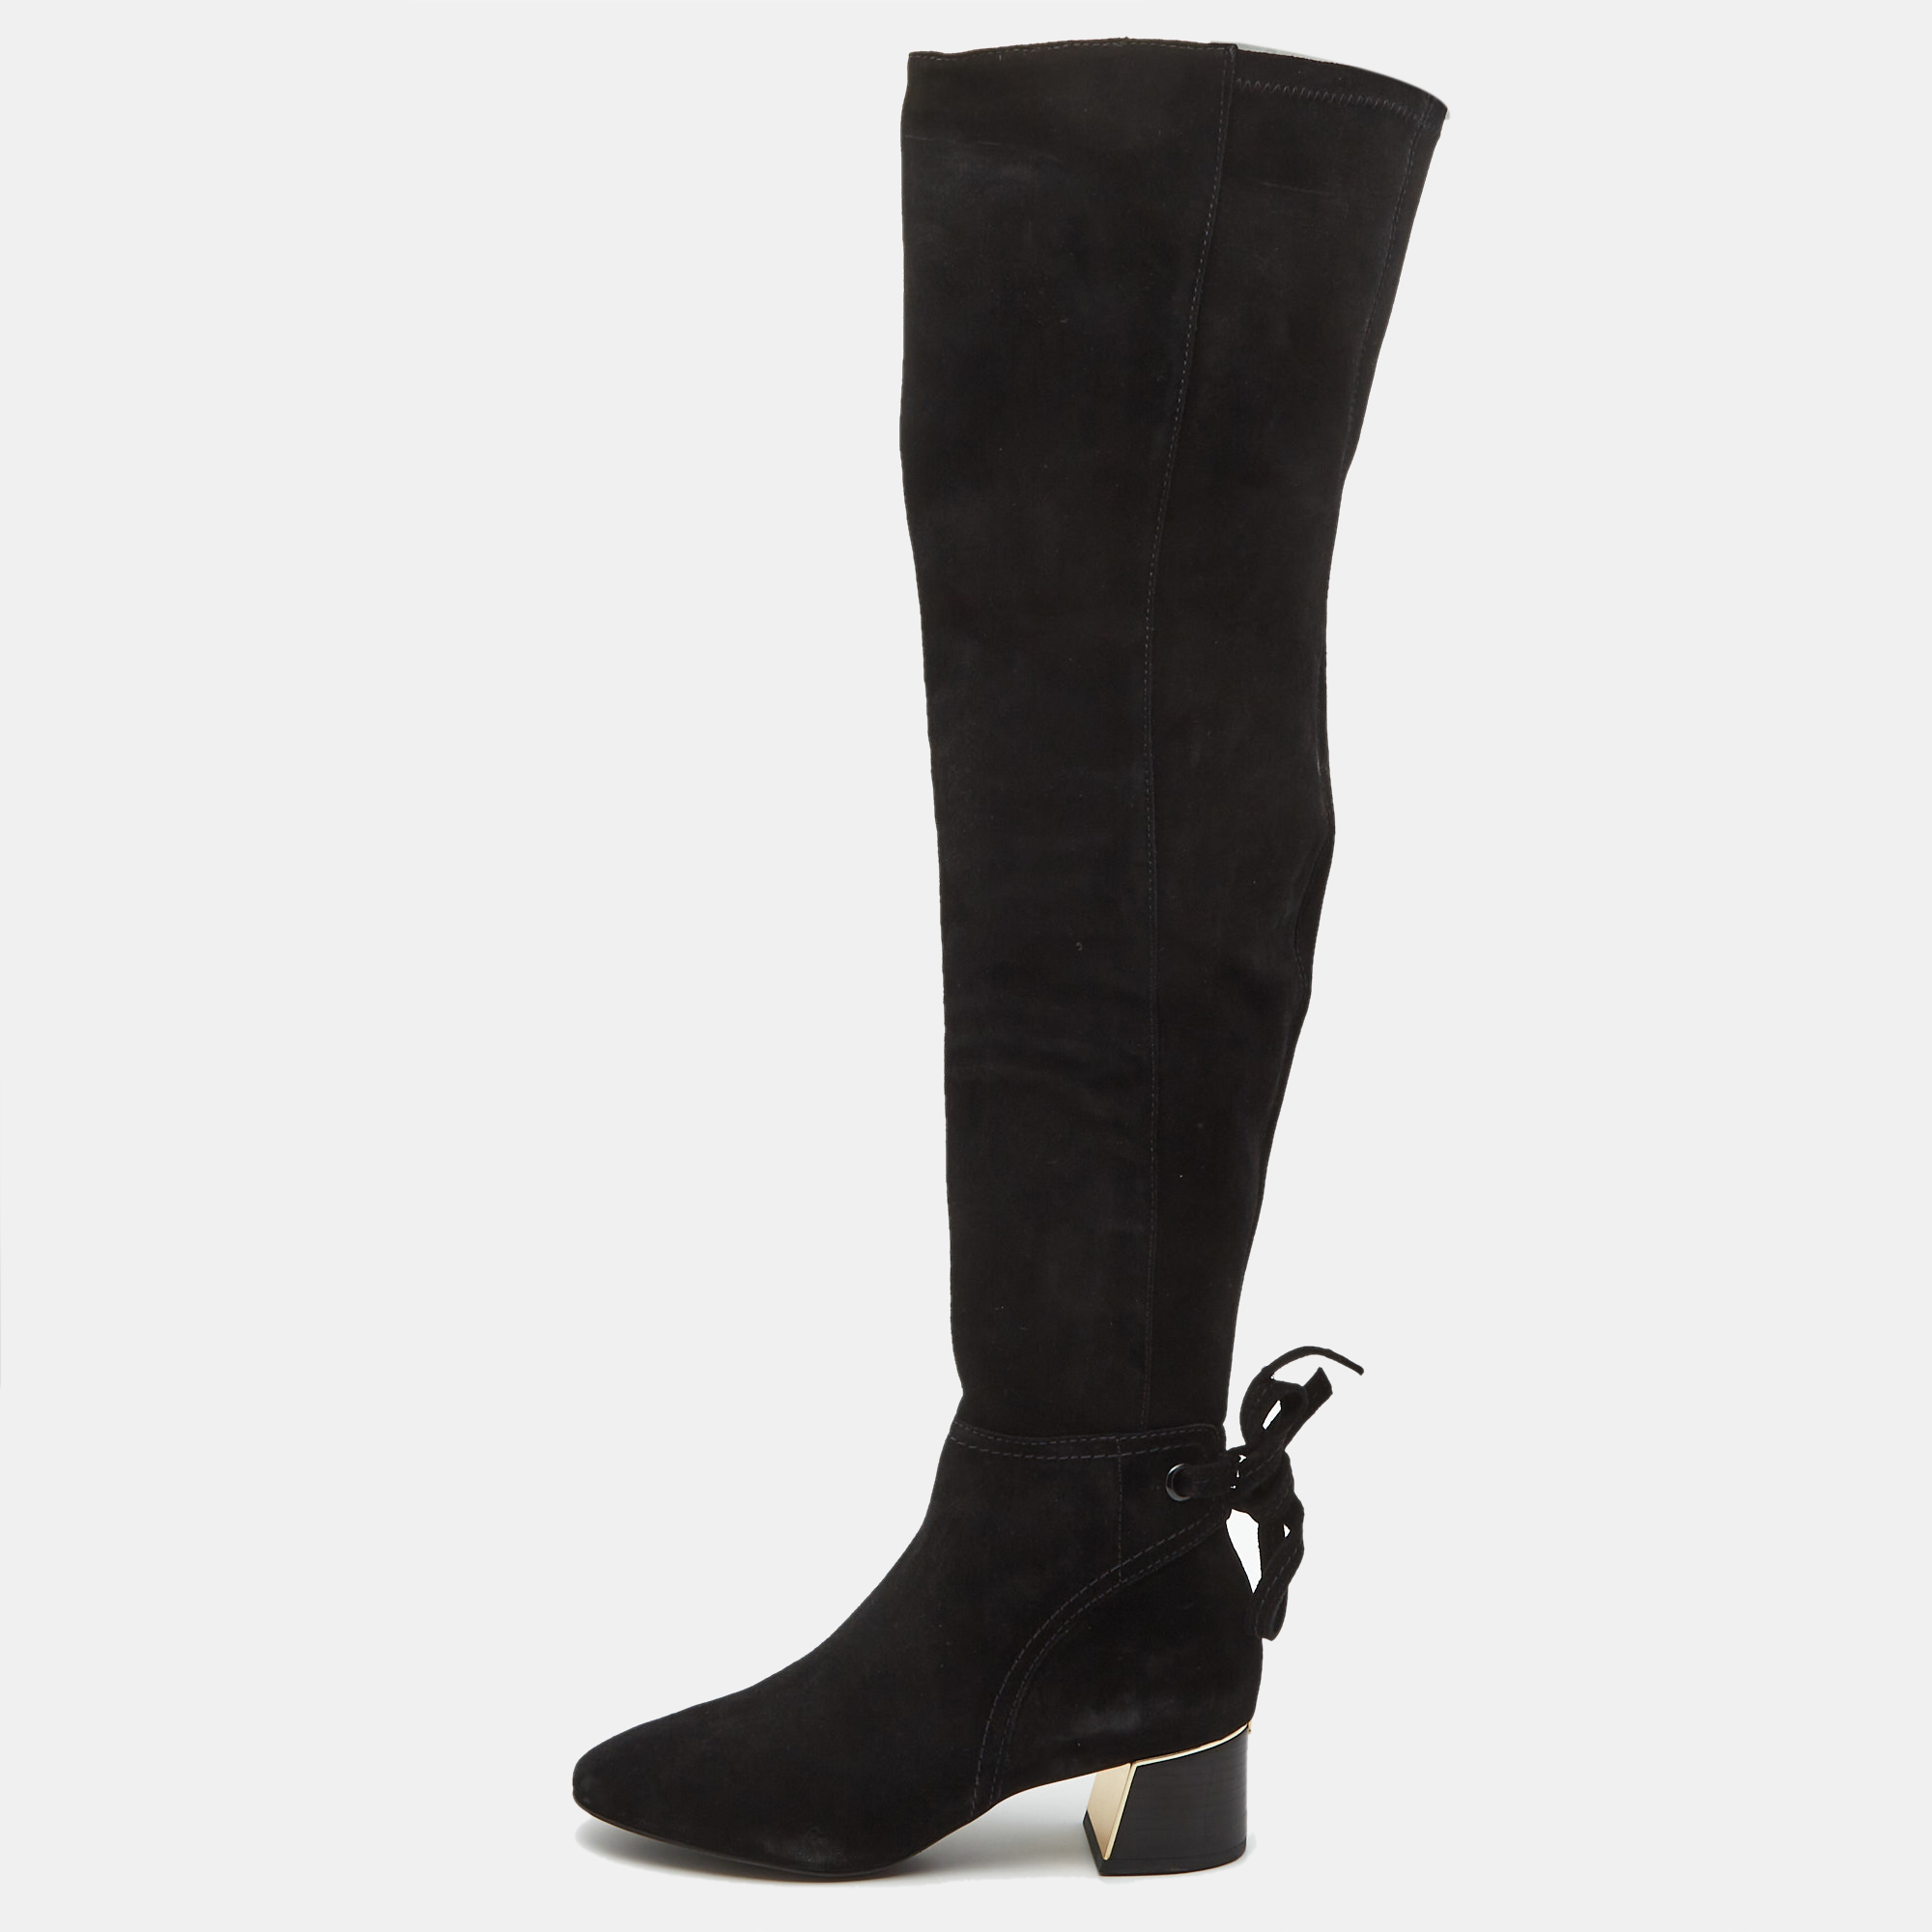 

Tory Burch Black Suede Over The Knee Length Block Heel Boots Size 39